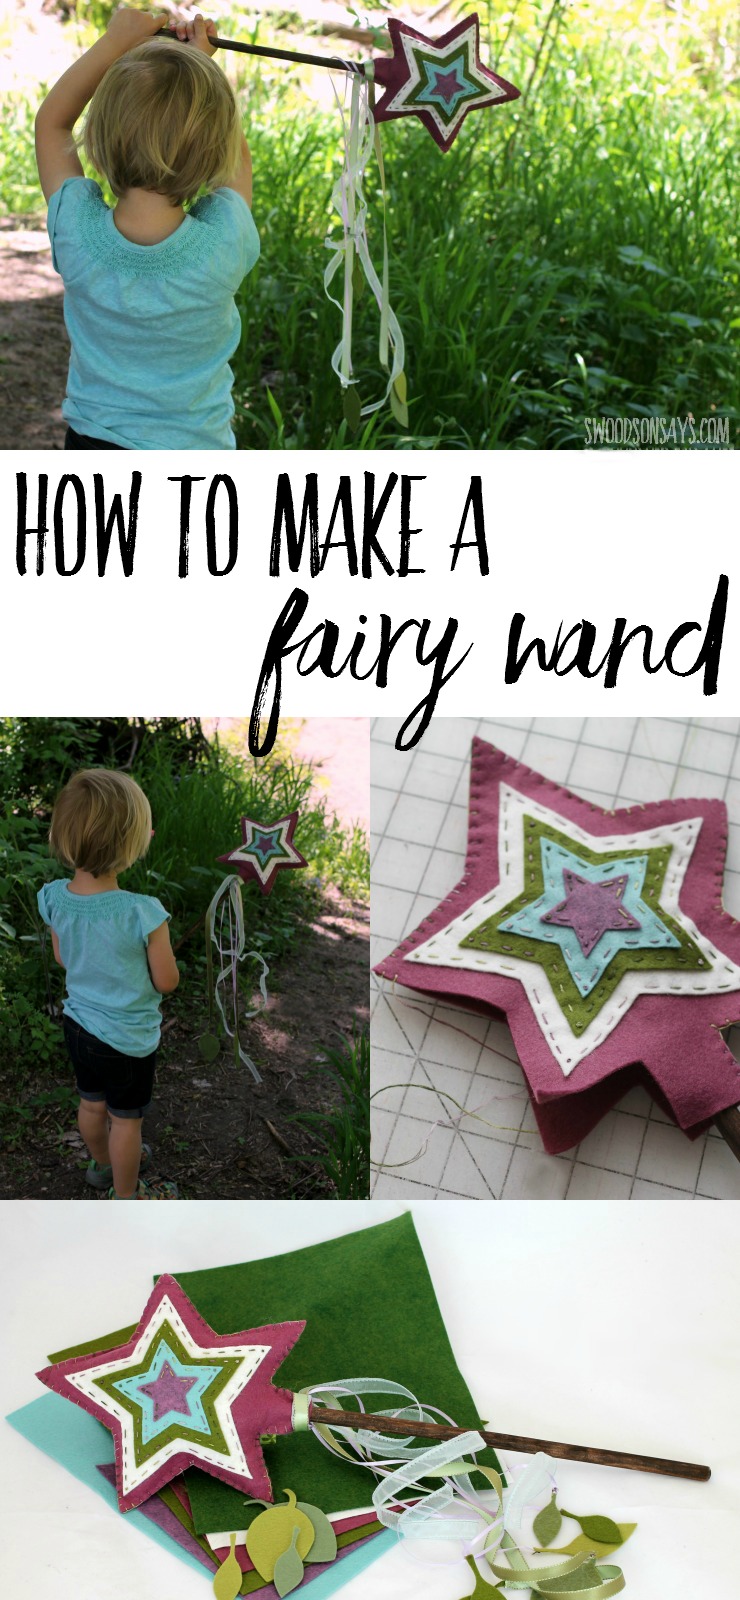 Learn how to make this diy fairy wand with beautiful wool blend felt, ribbon, and a spoon (super strong, so it won't break!). It's a perfect forest fairy accessory - free fairy wand pattern in a sponsored post.